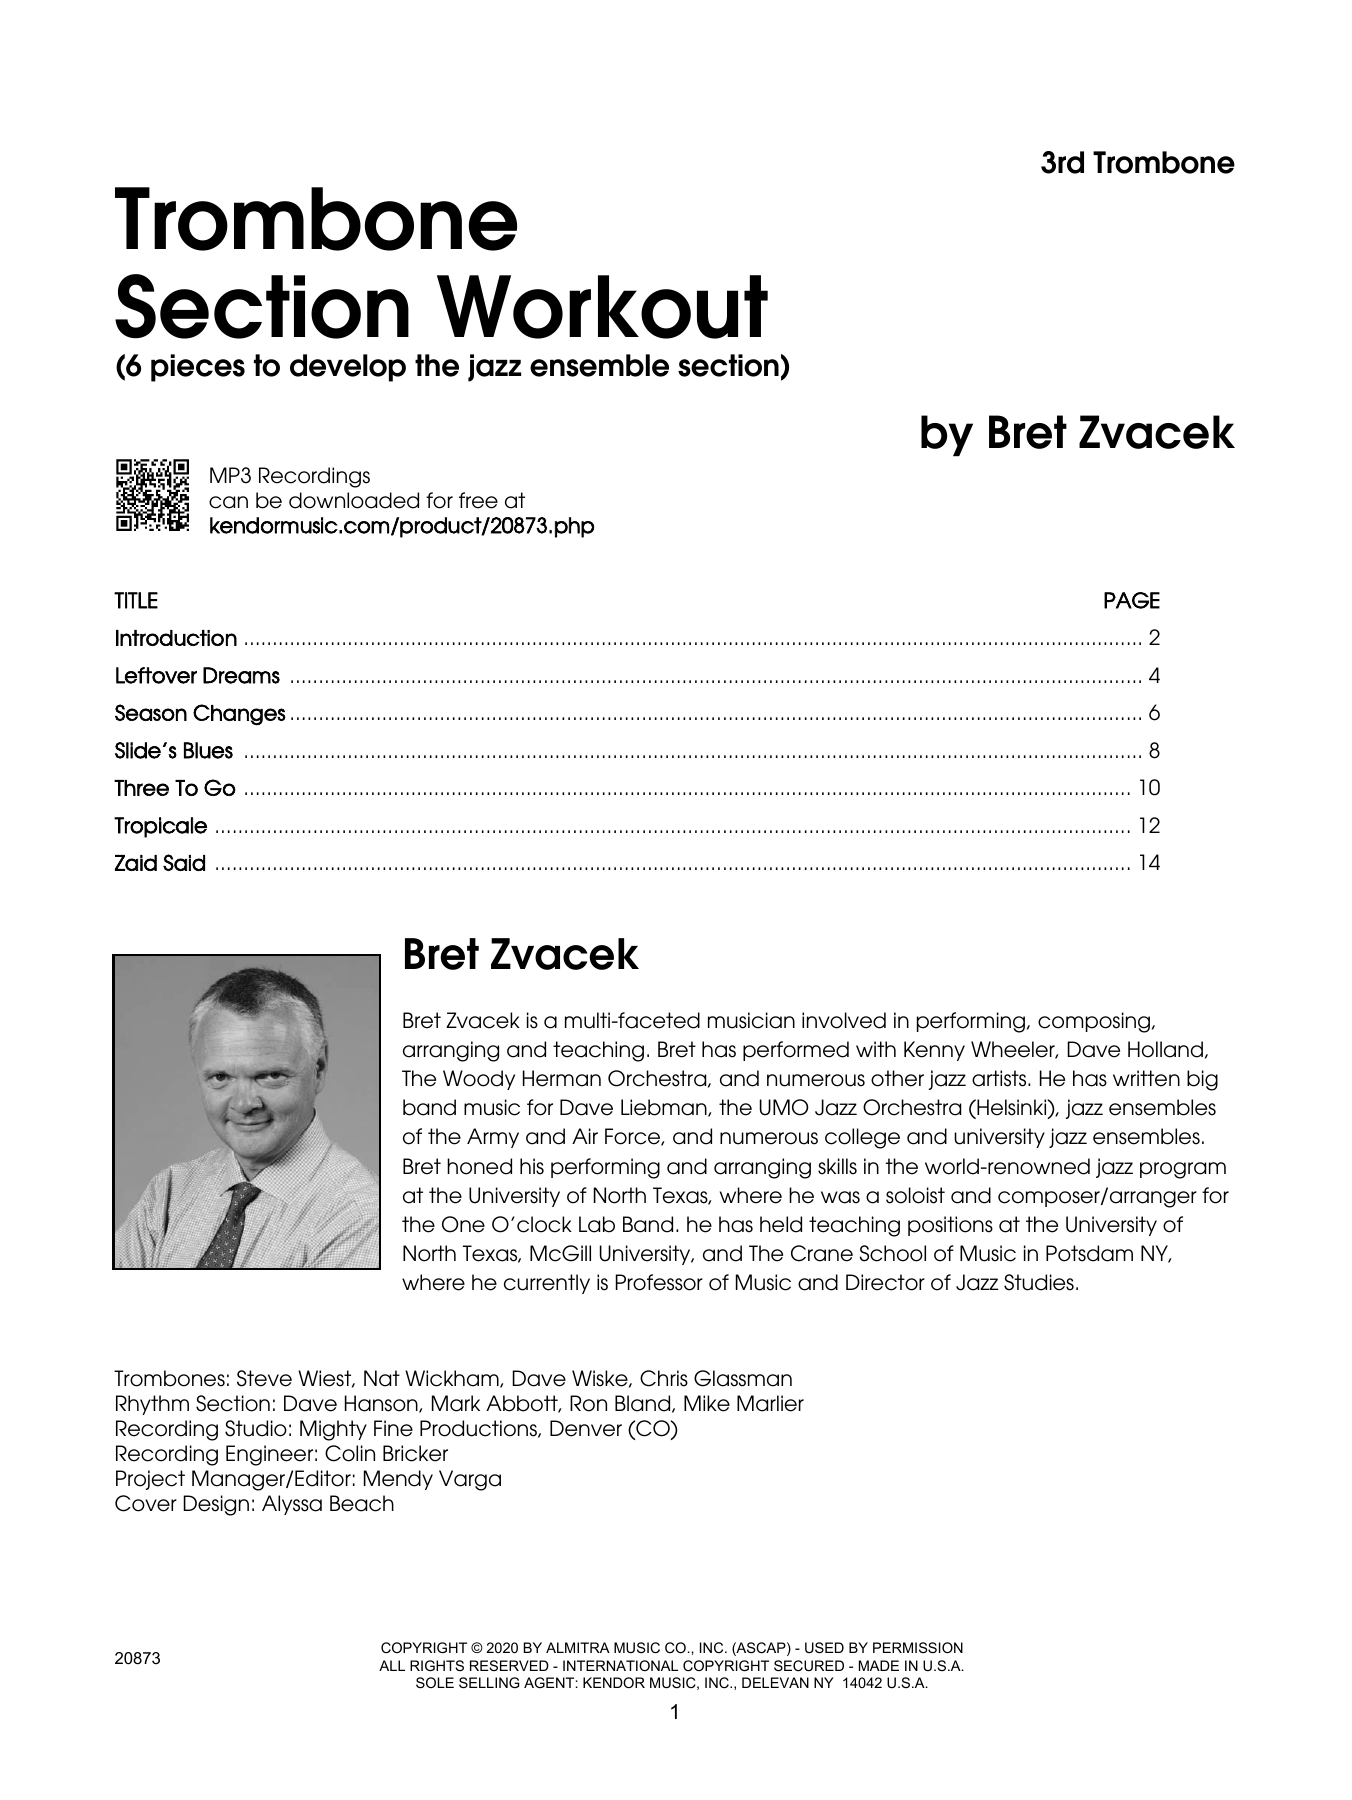 Bret Zvacek Trombone Section Workout with MP3's (6 pieces to develop the jazz ensemble section) - 3rd Trombone sheet music notes and chords. Download Printable PDF.